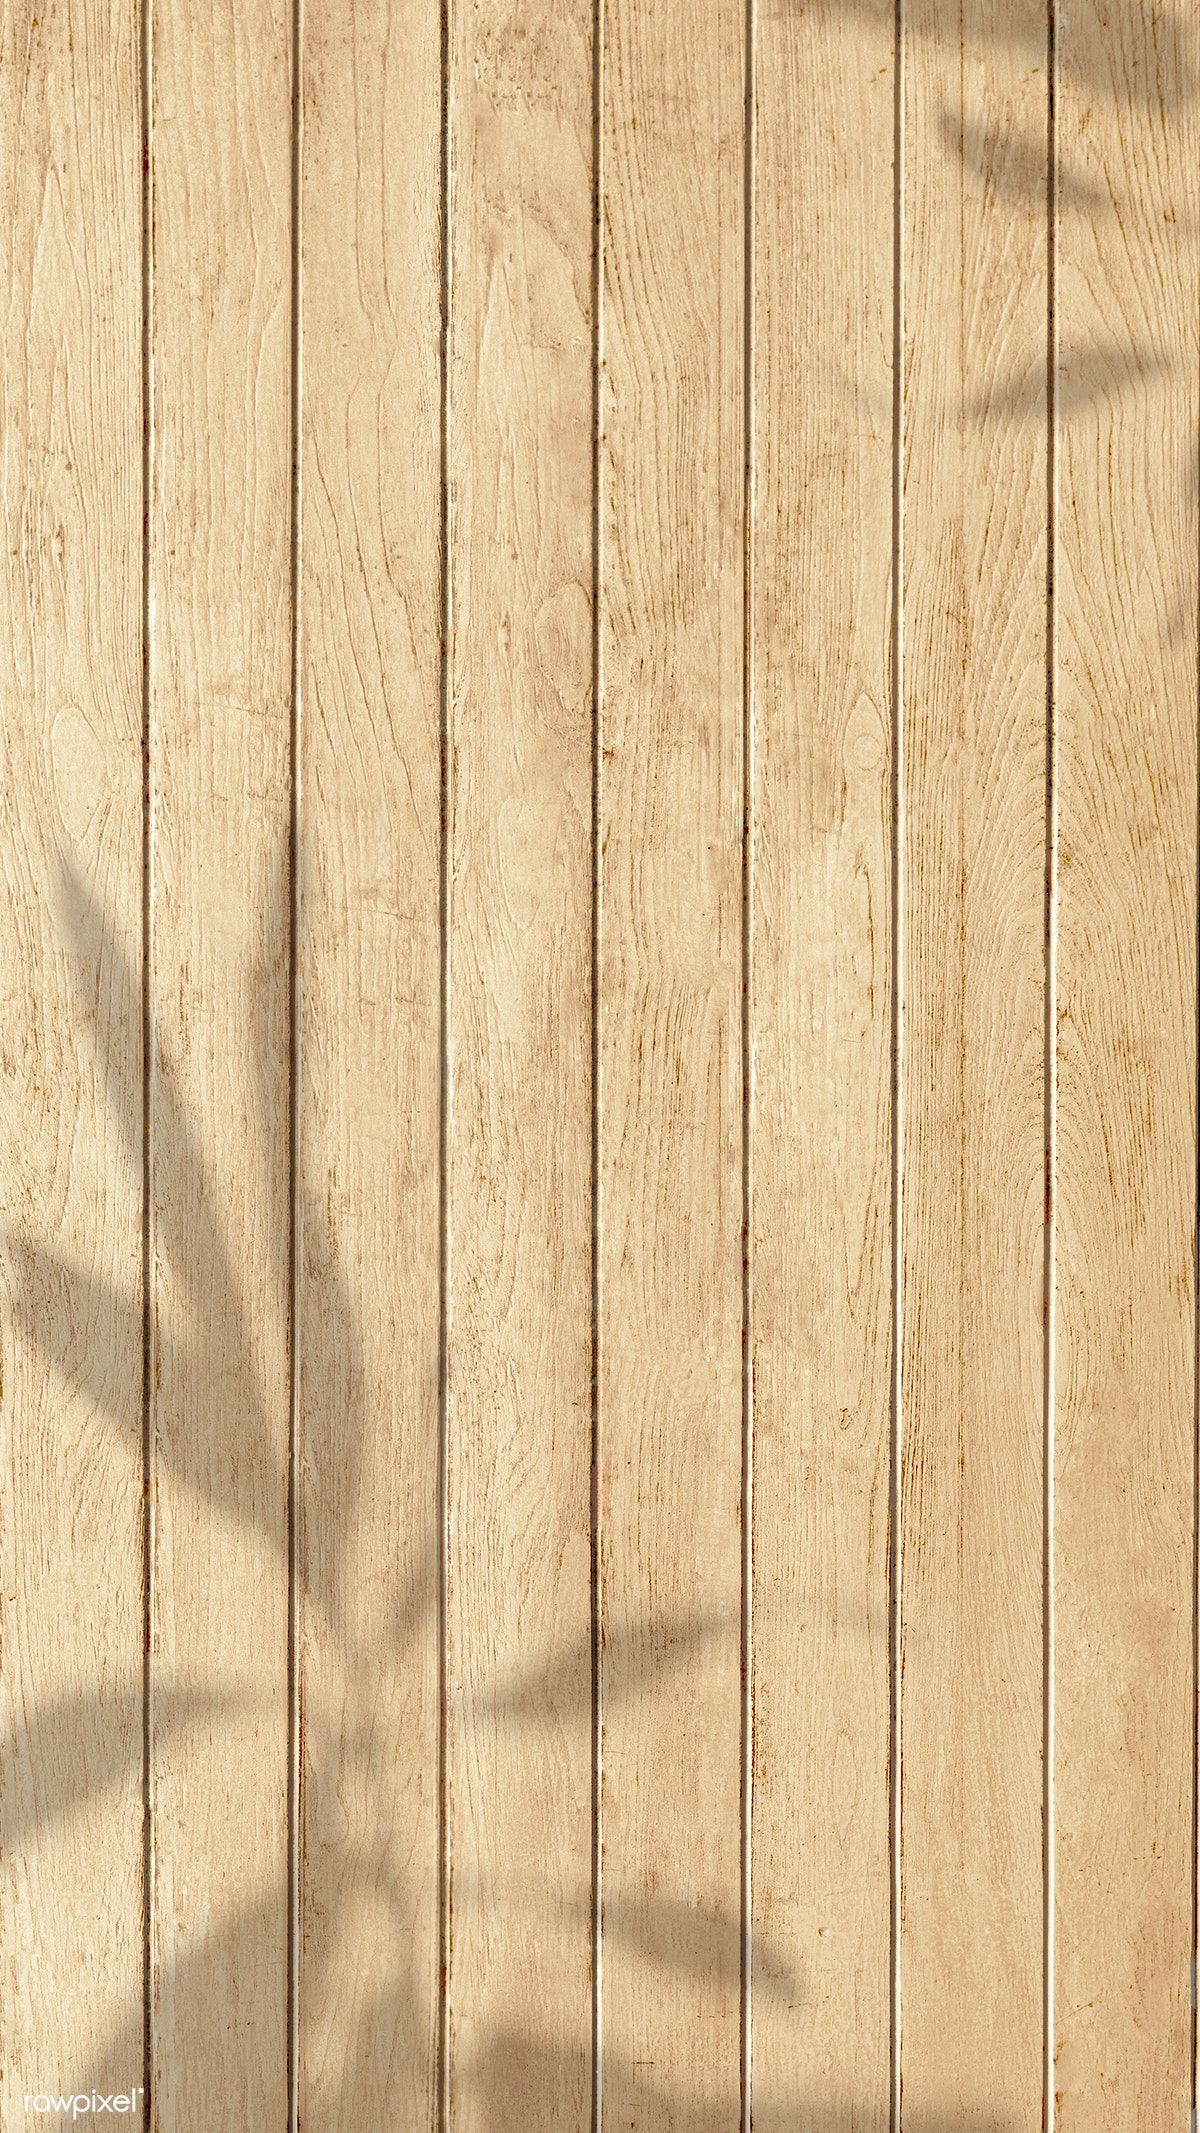 Leaves Shadow On Oak Wooden Texture Mobile Phone Wallpaper